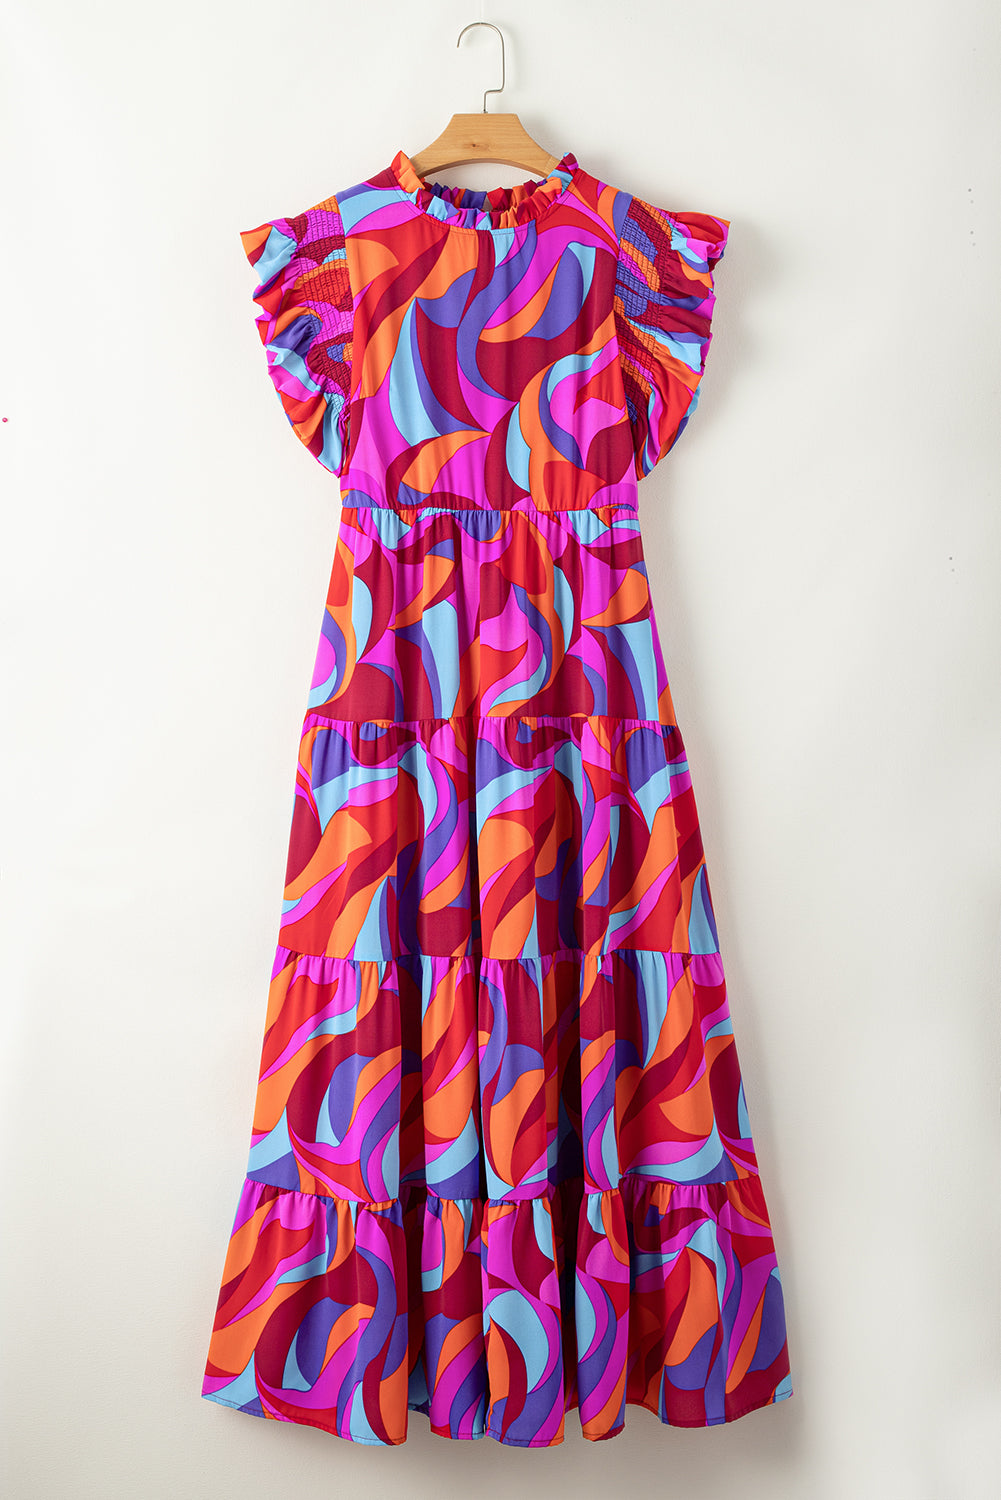 Blue Zone Planet |  Orange Abstract Printed High Waist Ruffle Tiered Long Dress Blue Zone Planet